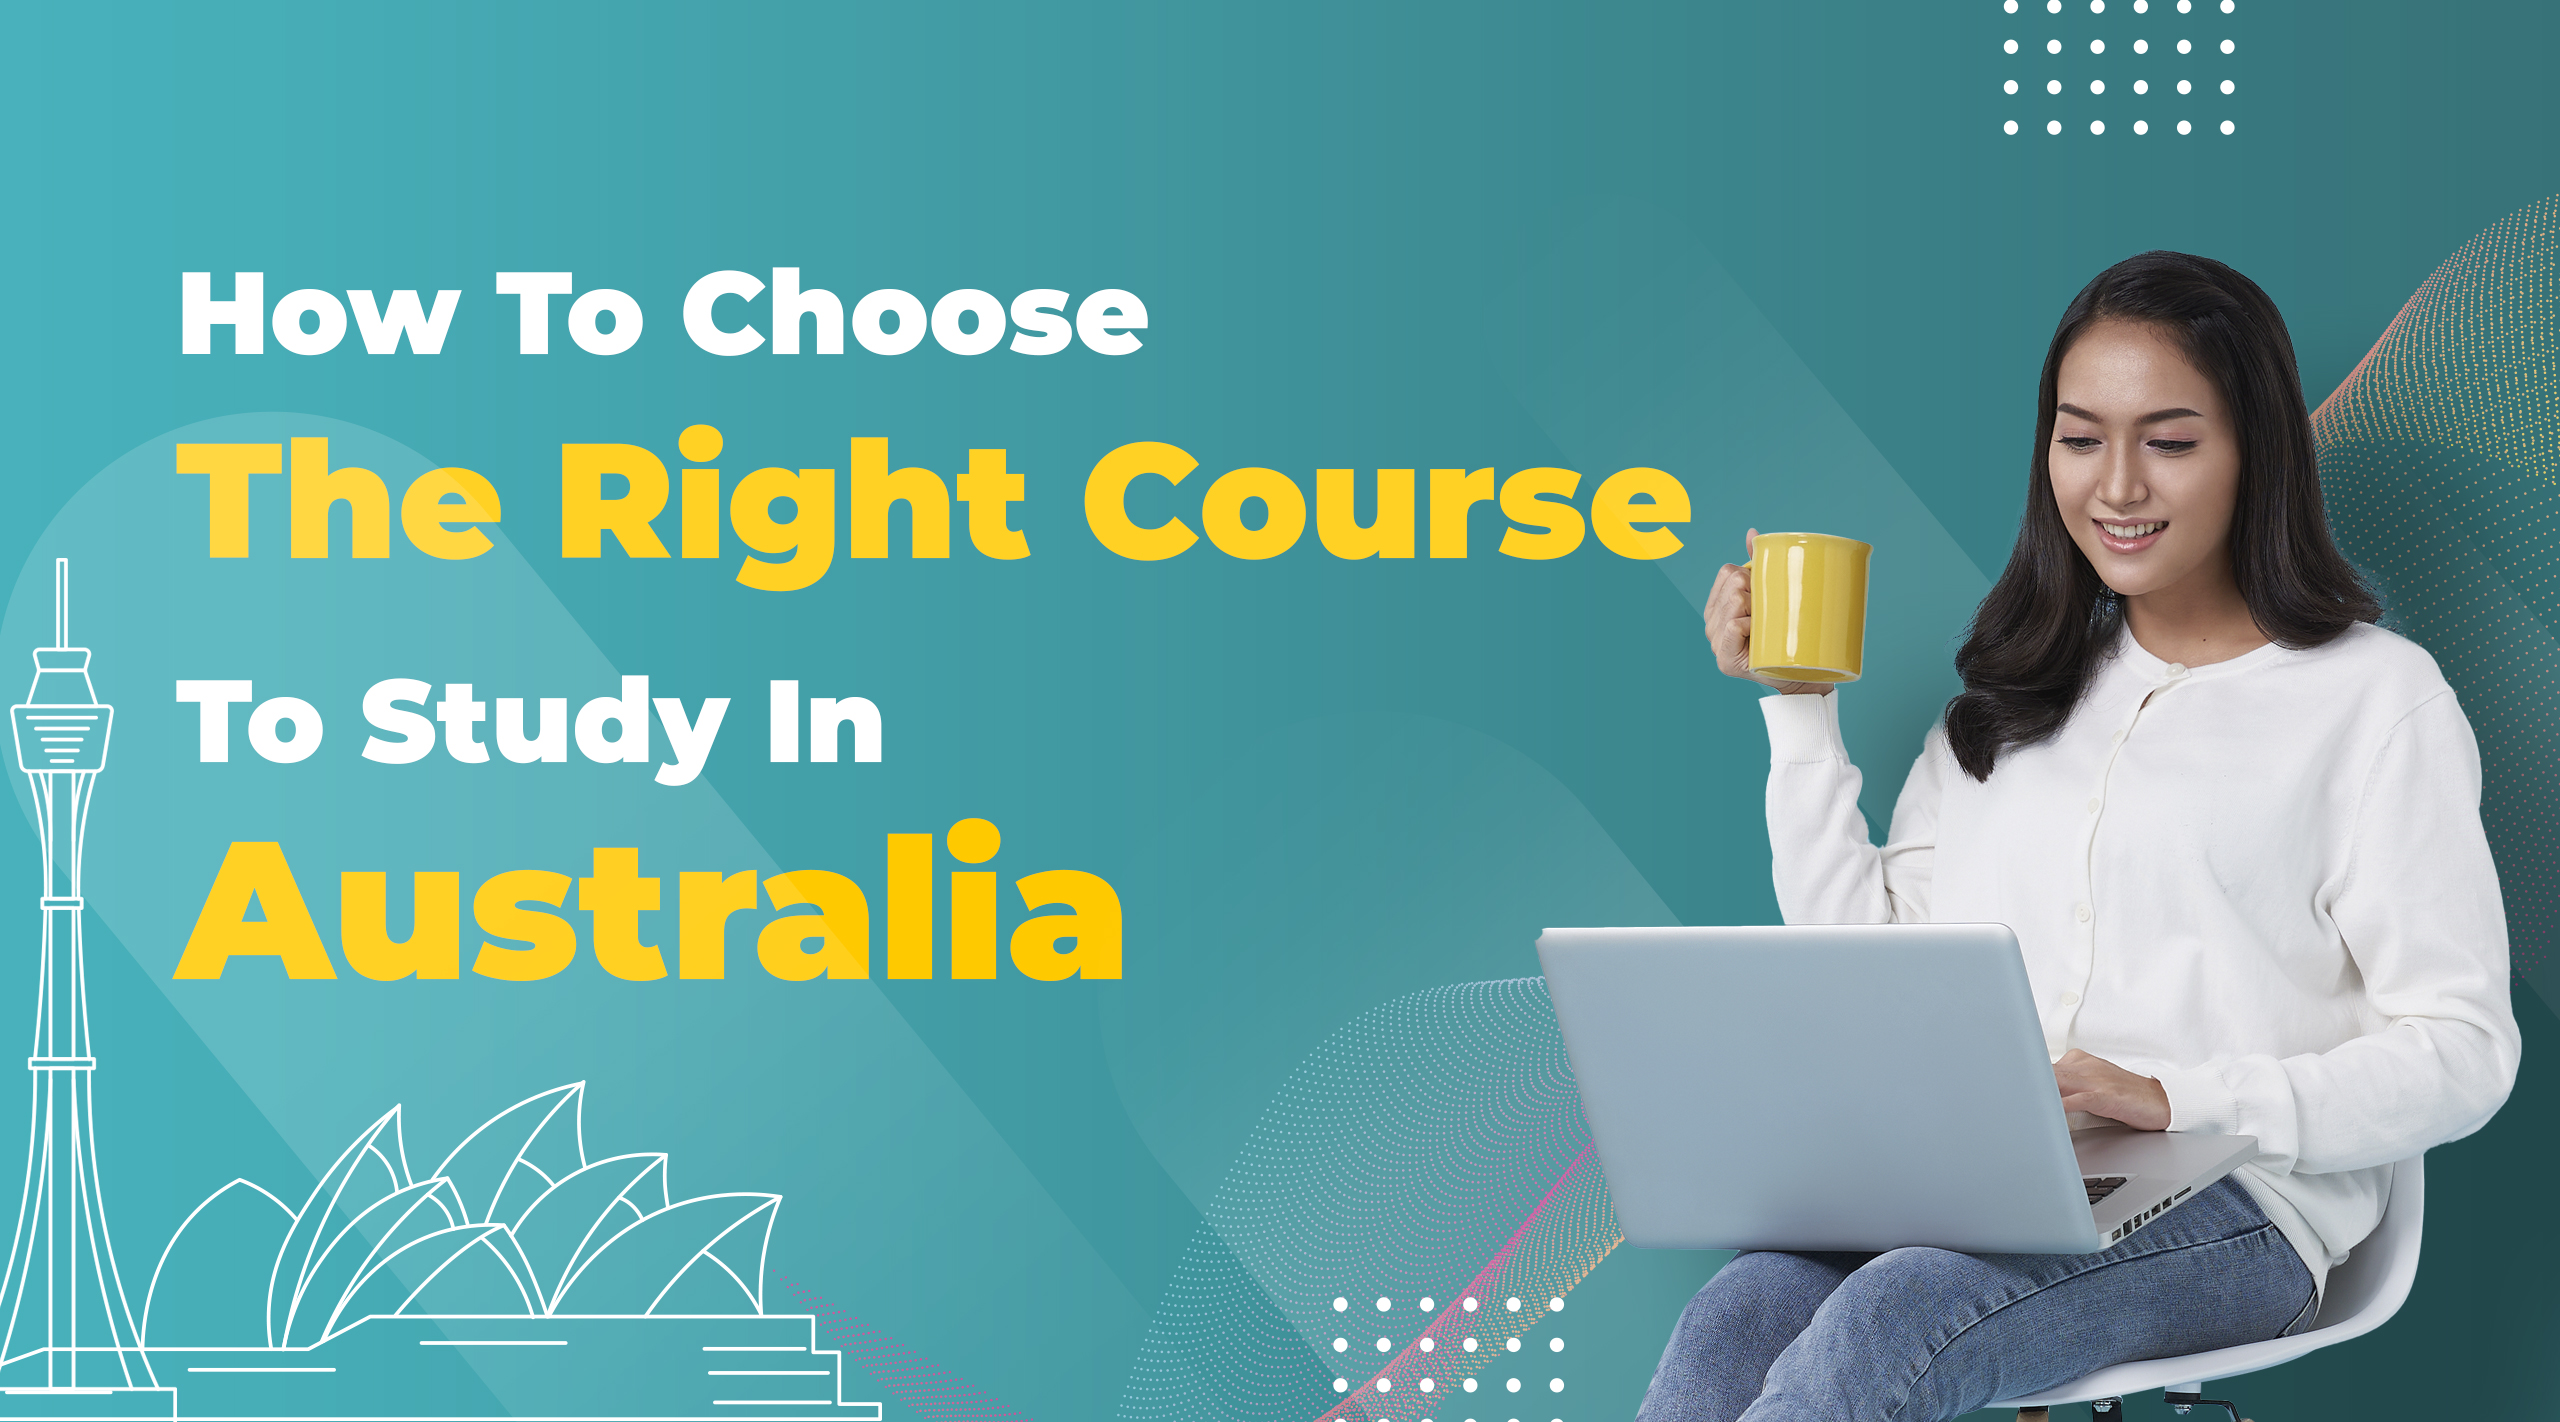 How To Choose The Right Course To Study in Australia